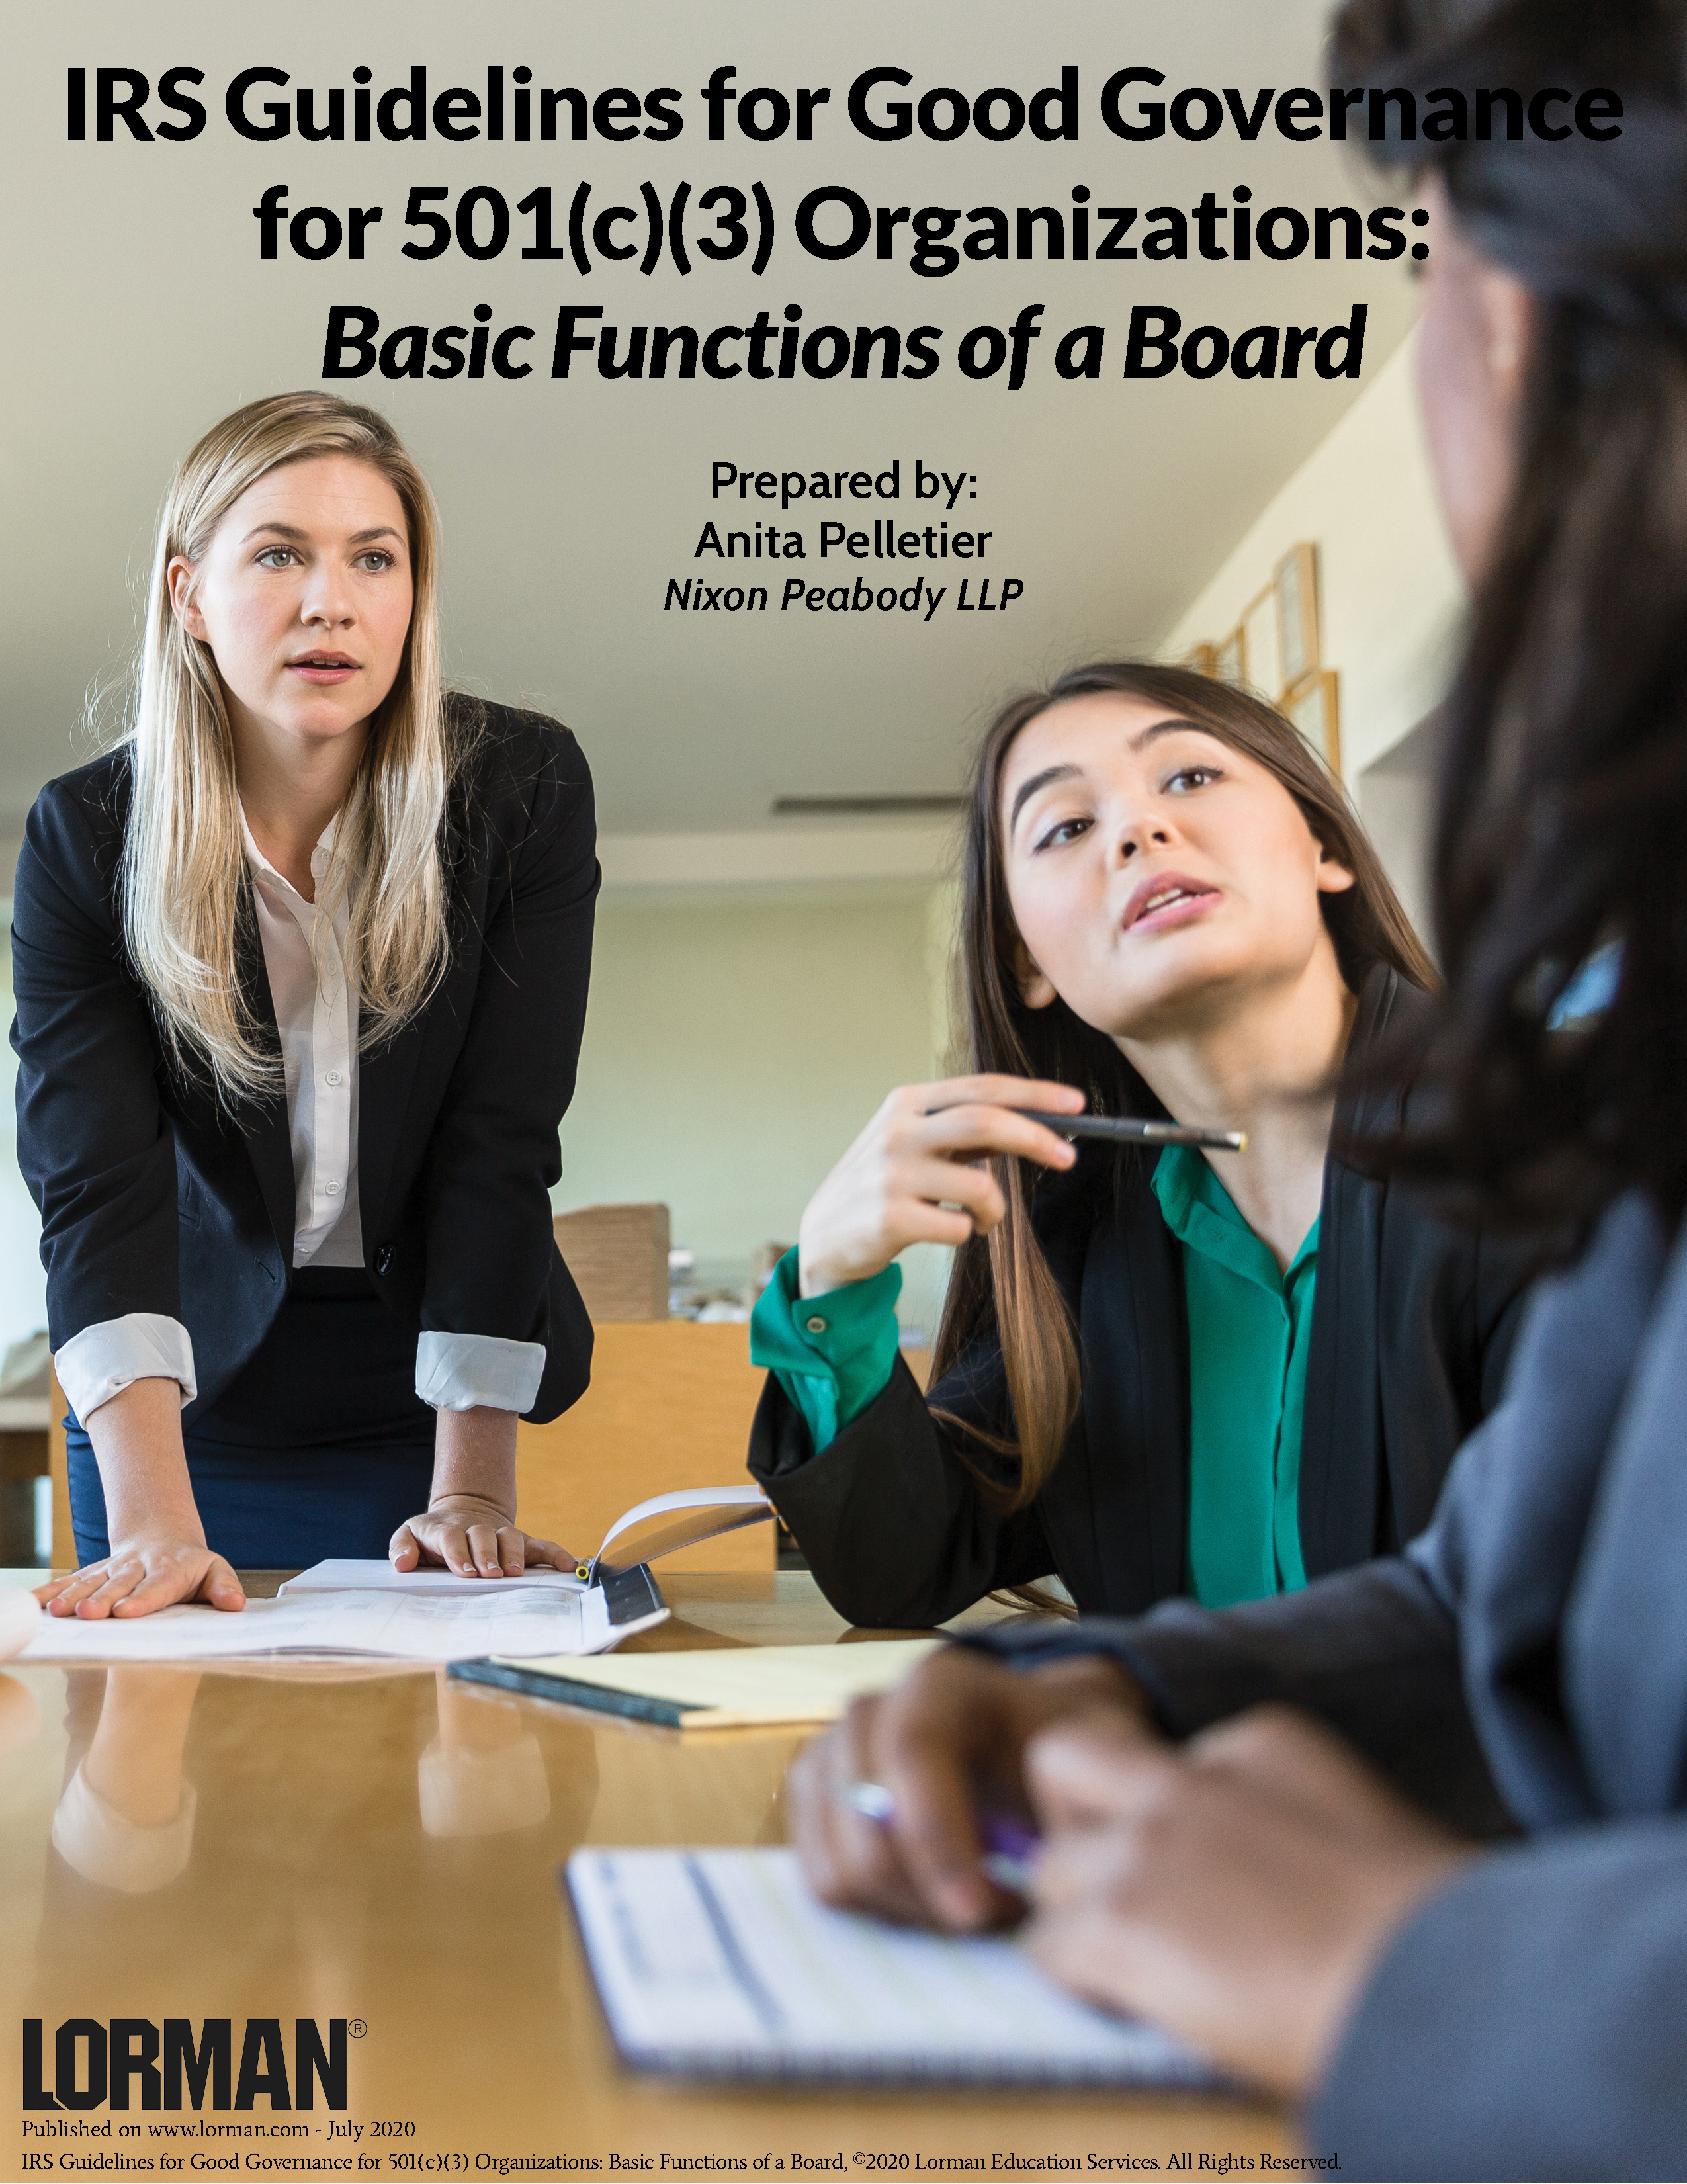 IRS Guidelines for Good Governance for 501(c)(3) Organizations: Basic Functions of a Board